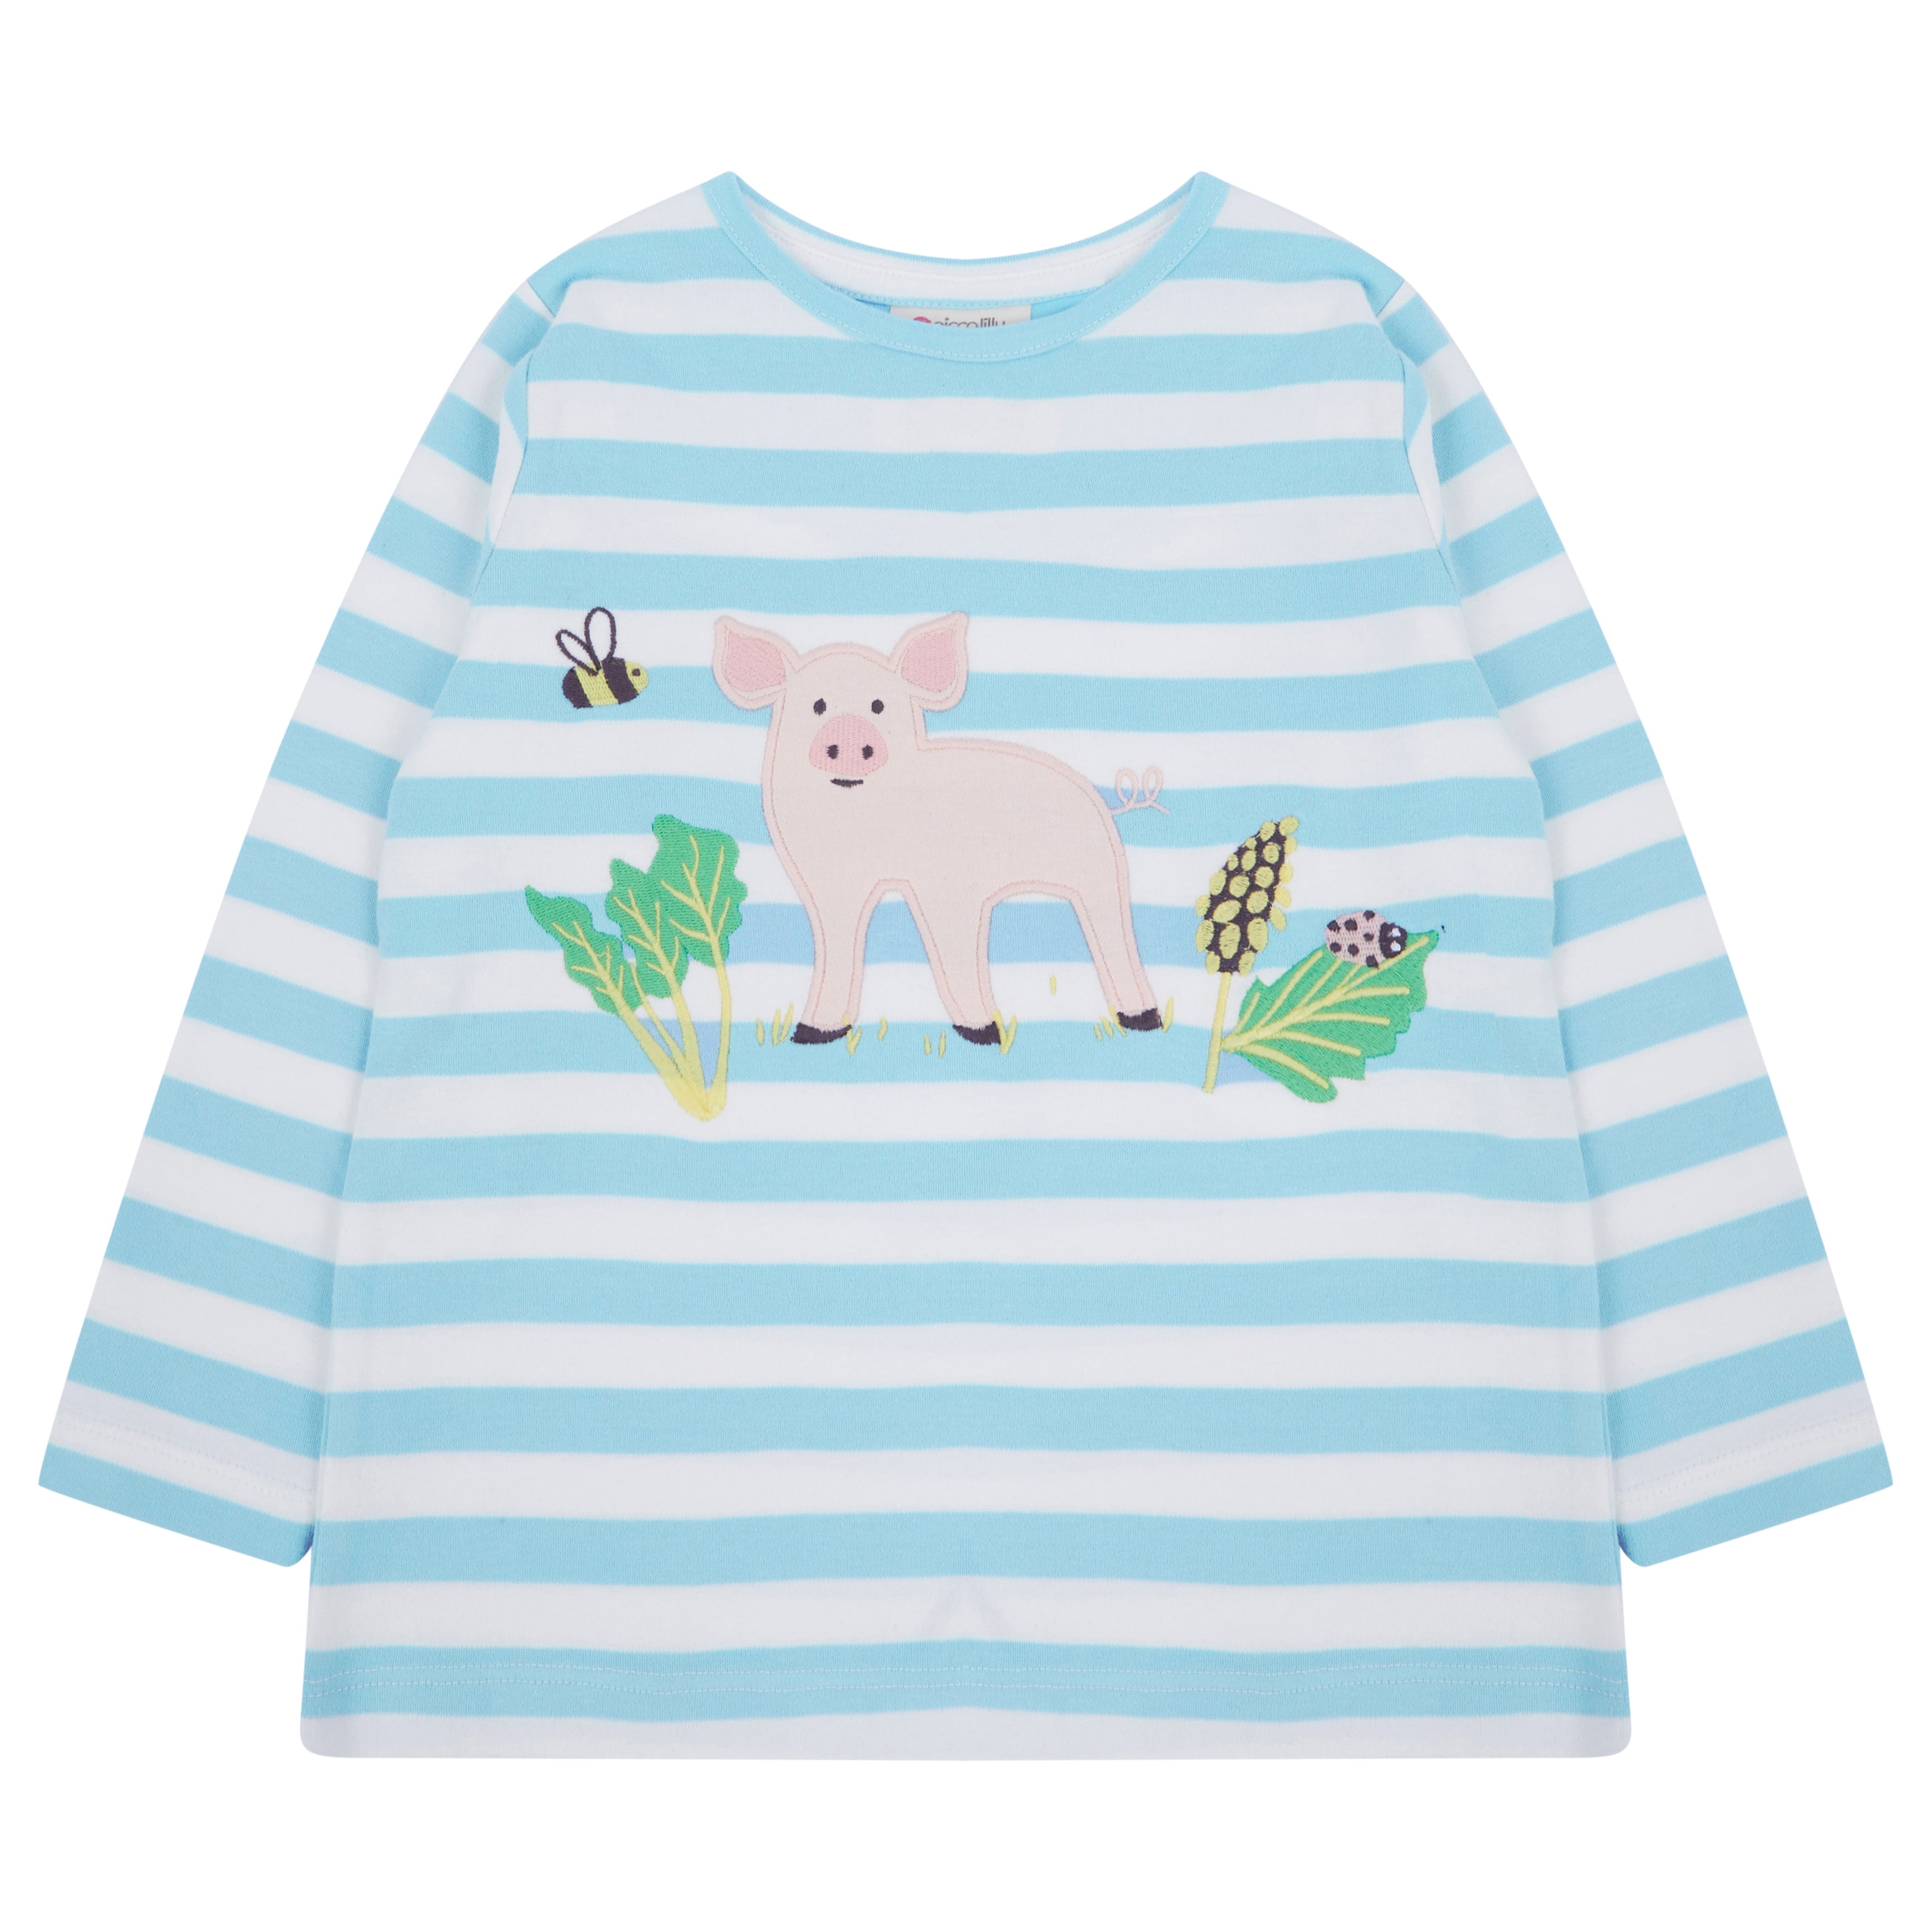 Piccalilly Kids Applique Top - Piglet